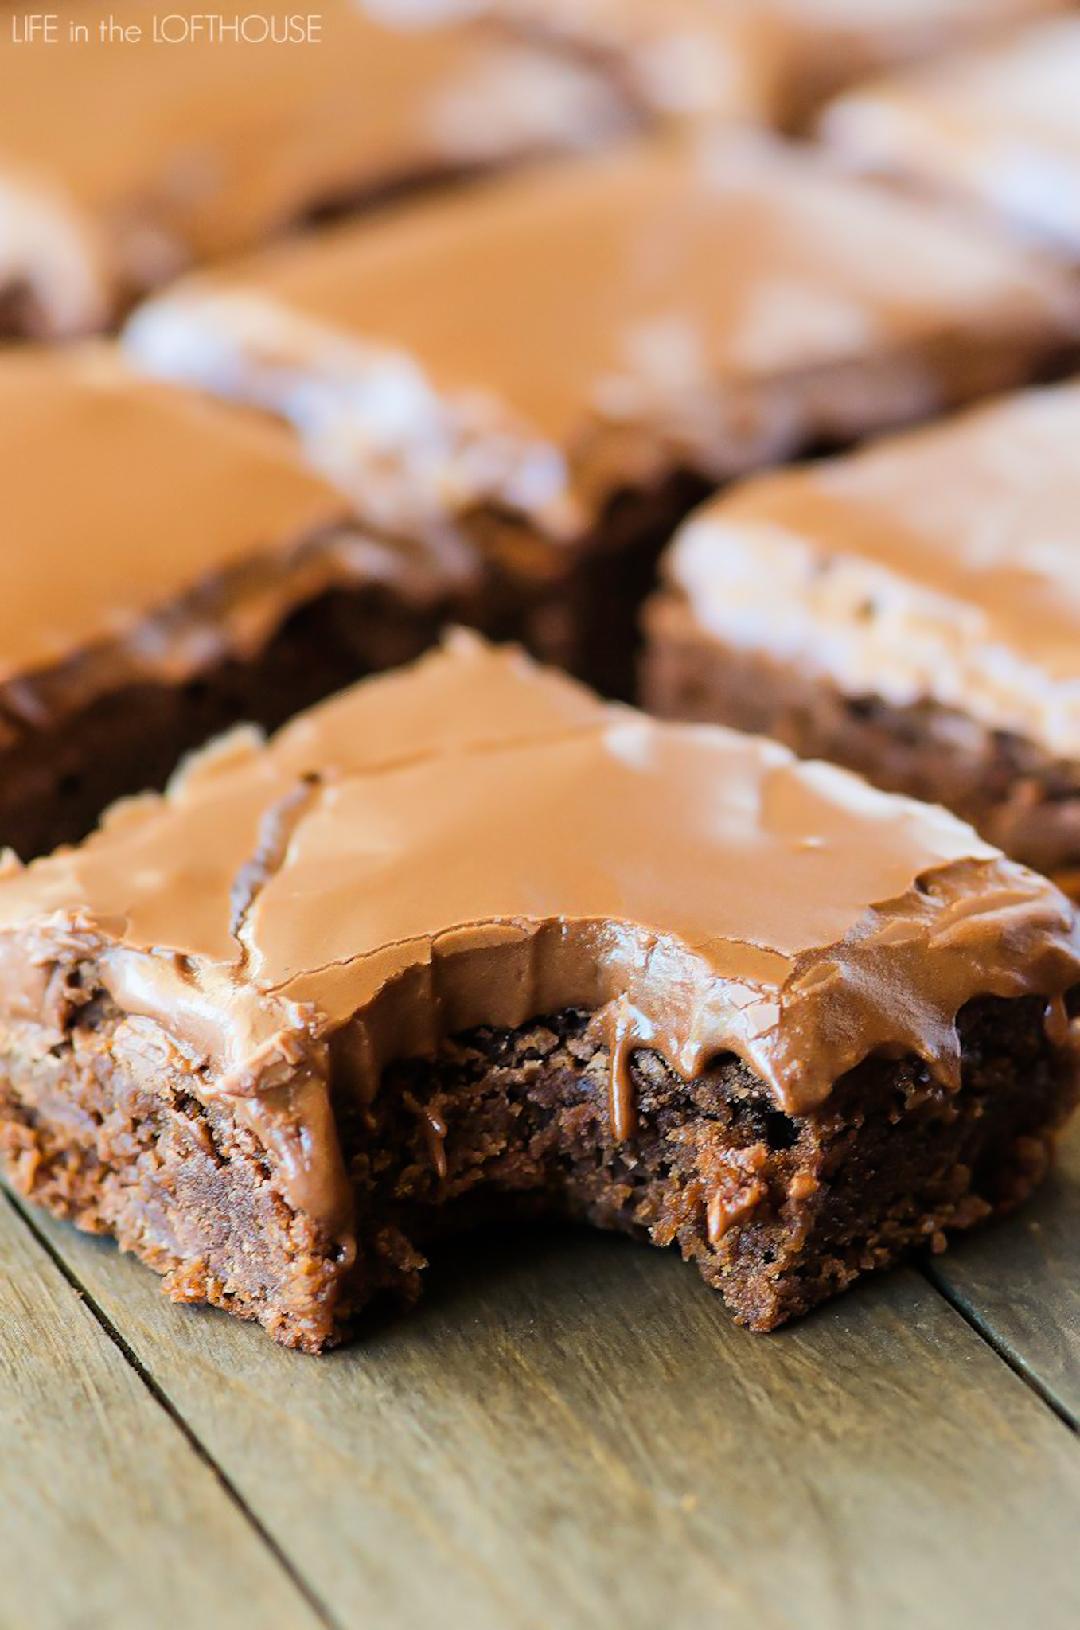 Lunch Lady Brownies are moist, full of chocolate flavor and absolutely delicious. Life-in-the-Lofthouse.com